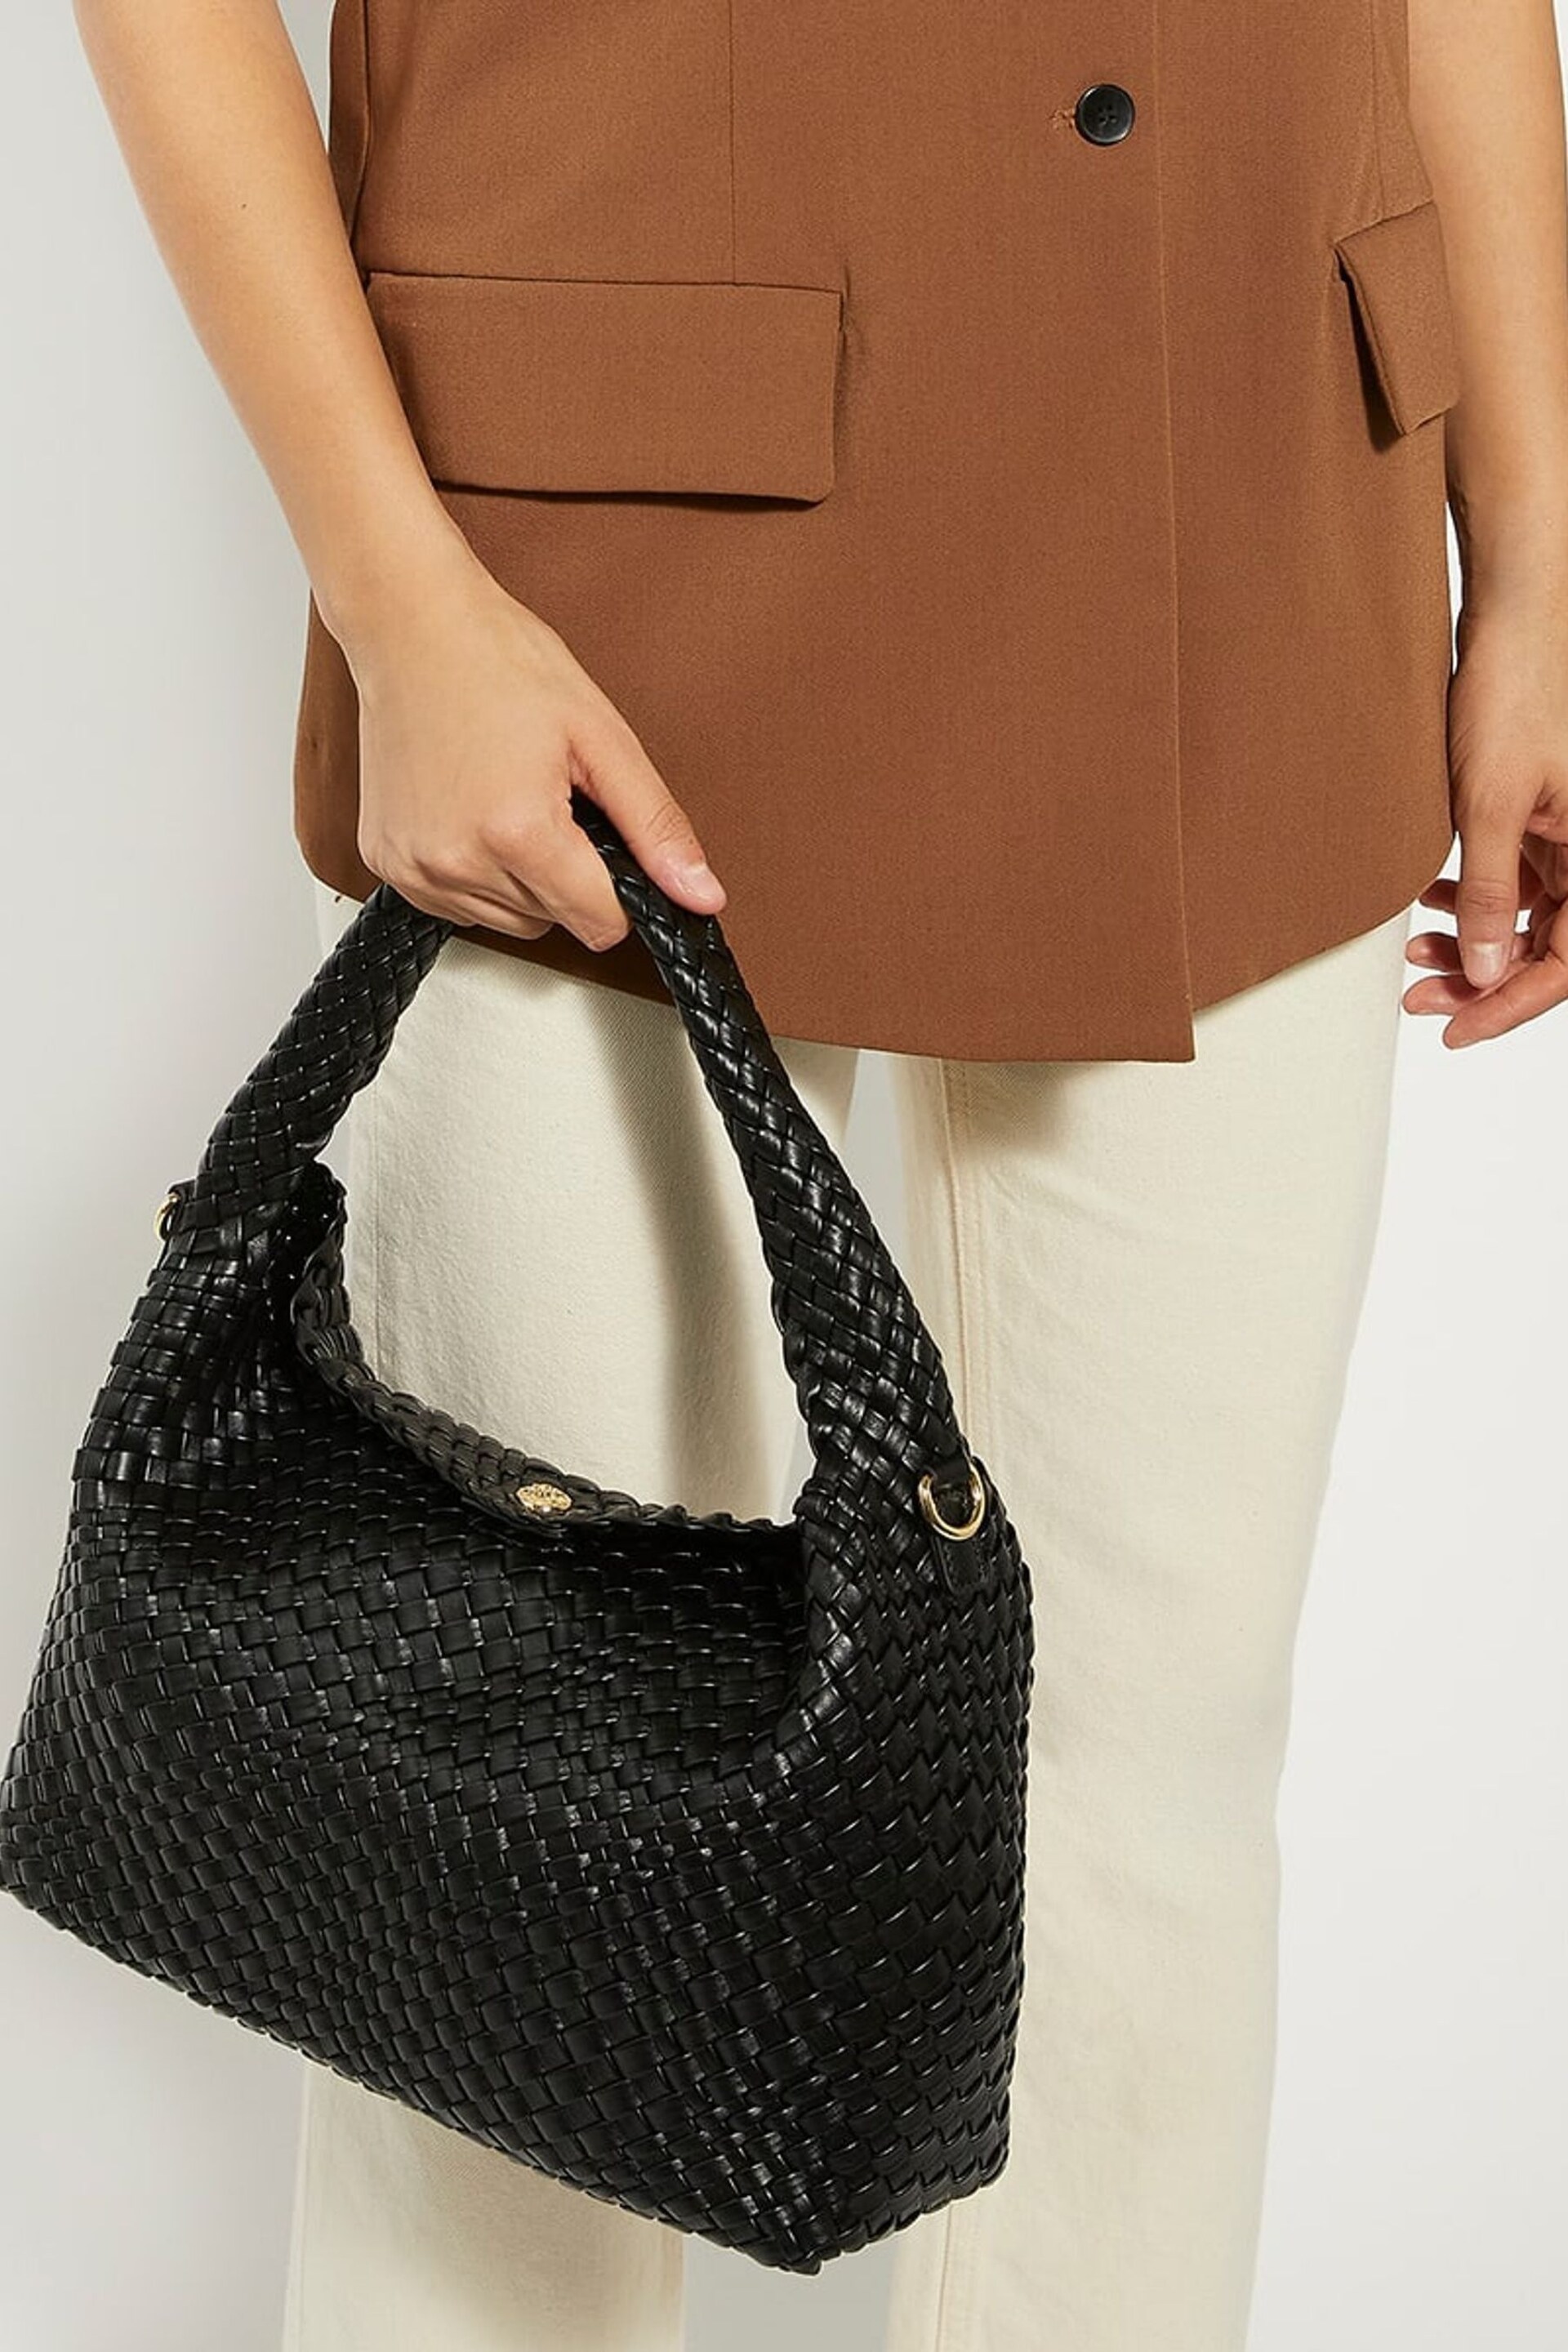 Dune London Black Large Deliberate Woven Slouch Bag - Image 1 of 7